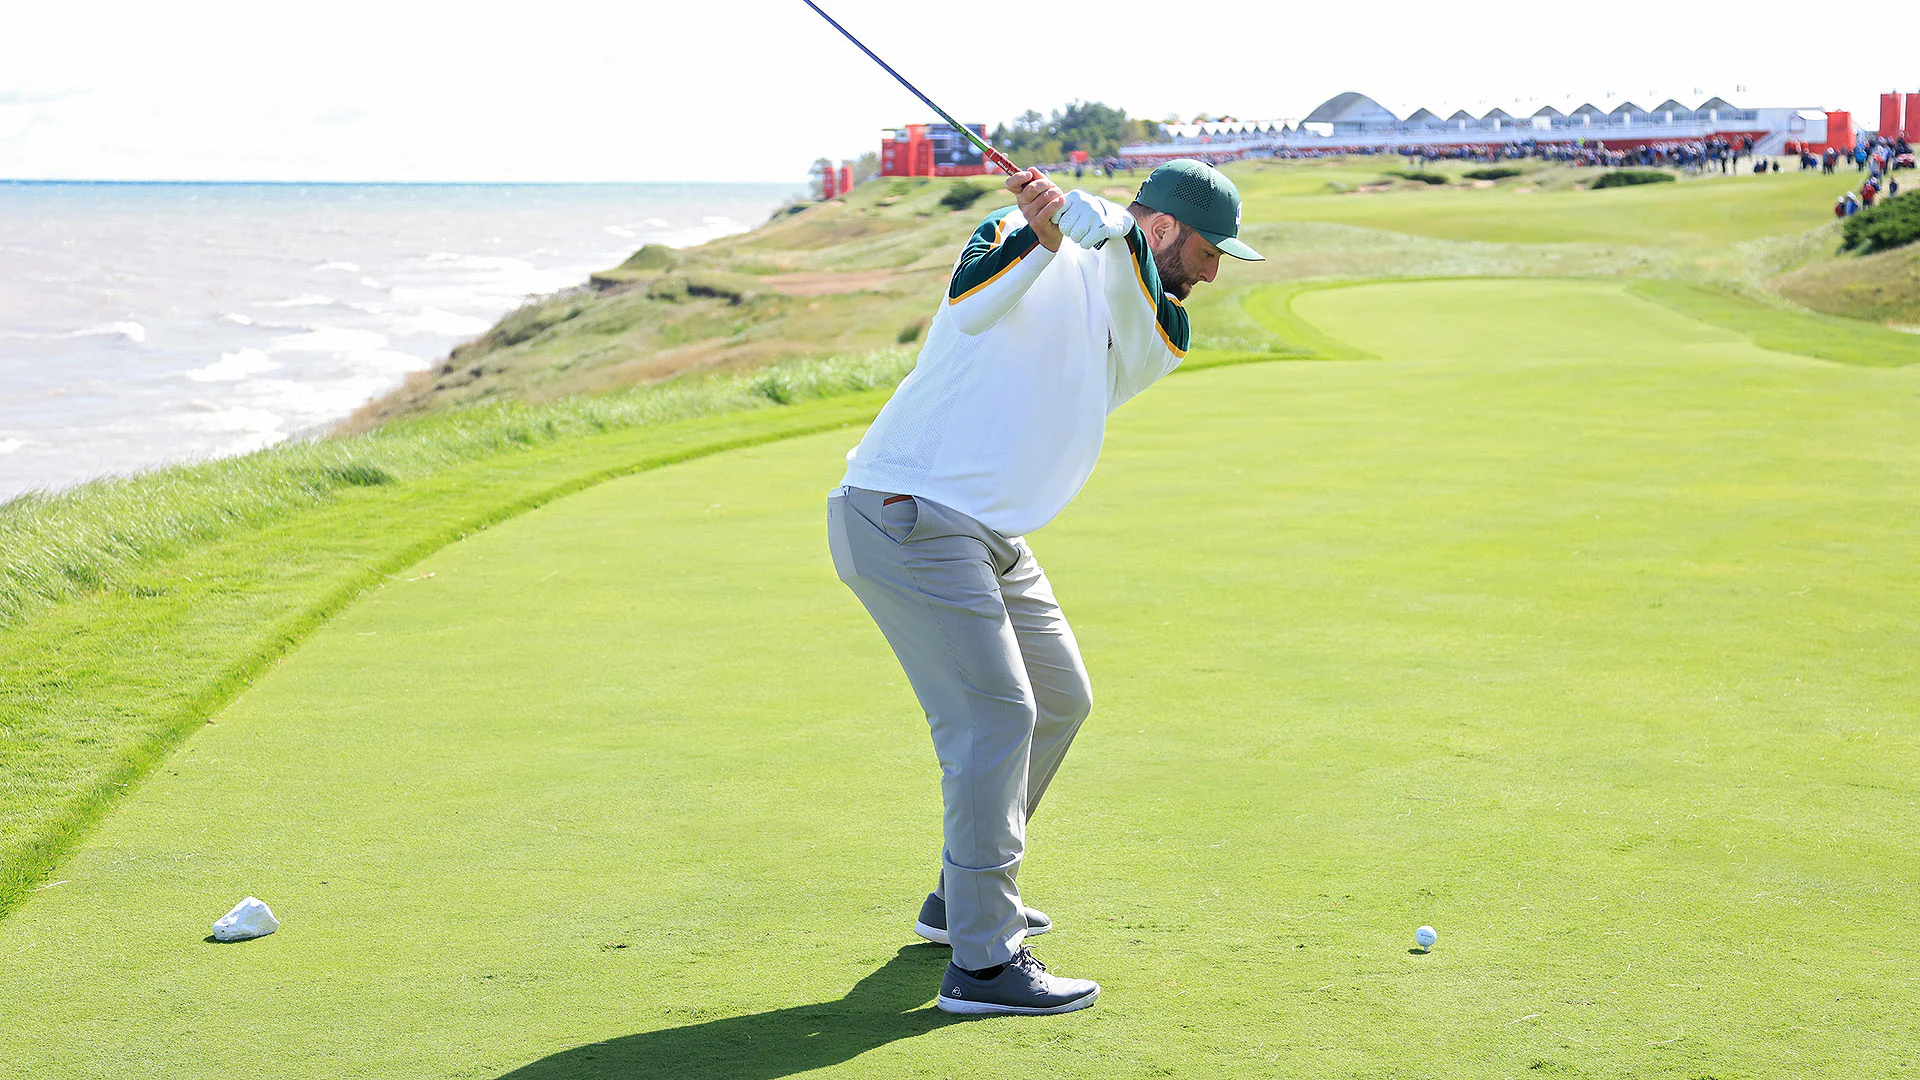 2020 Ryder Cup: Jon Rahm ready for five matches, but Whistling Straits a stern test